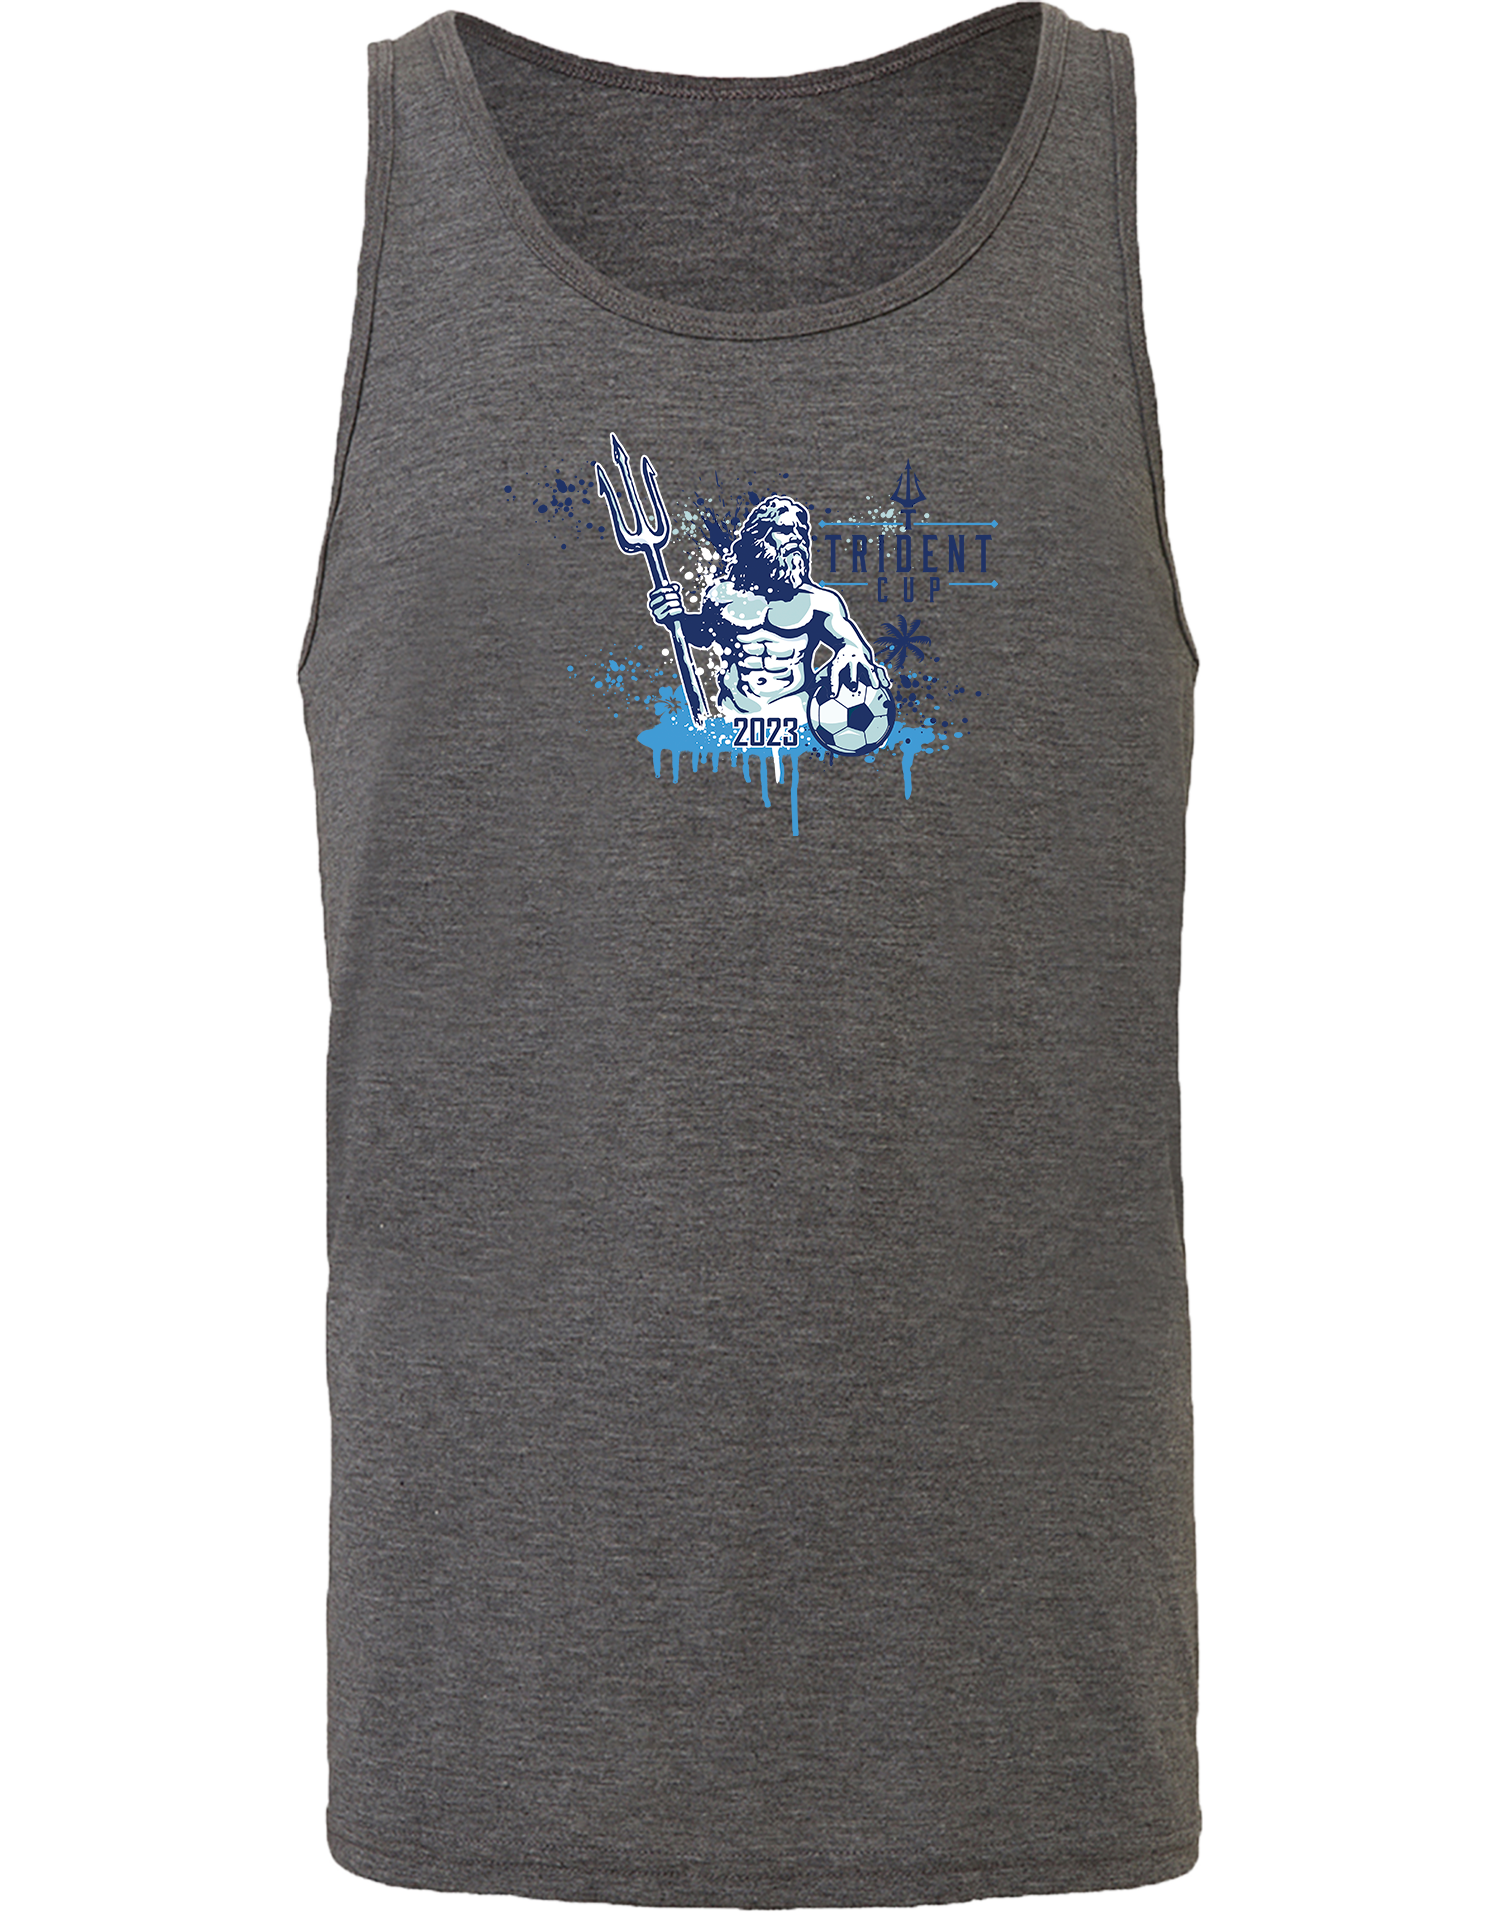 TANK TOP - 2023 Trident Cup